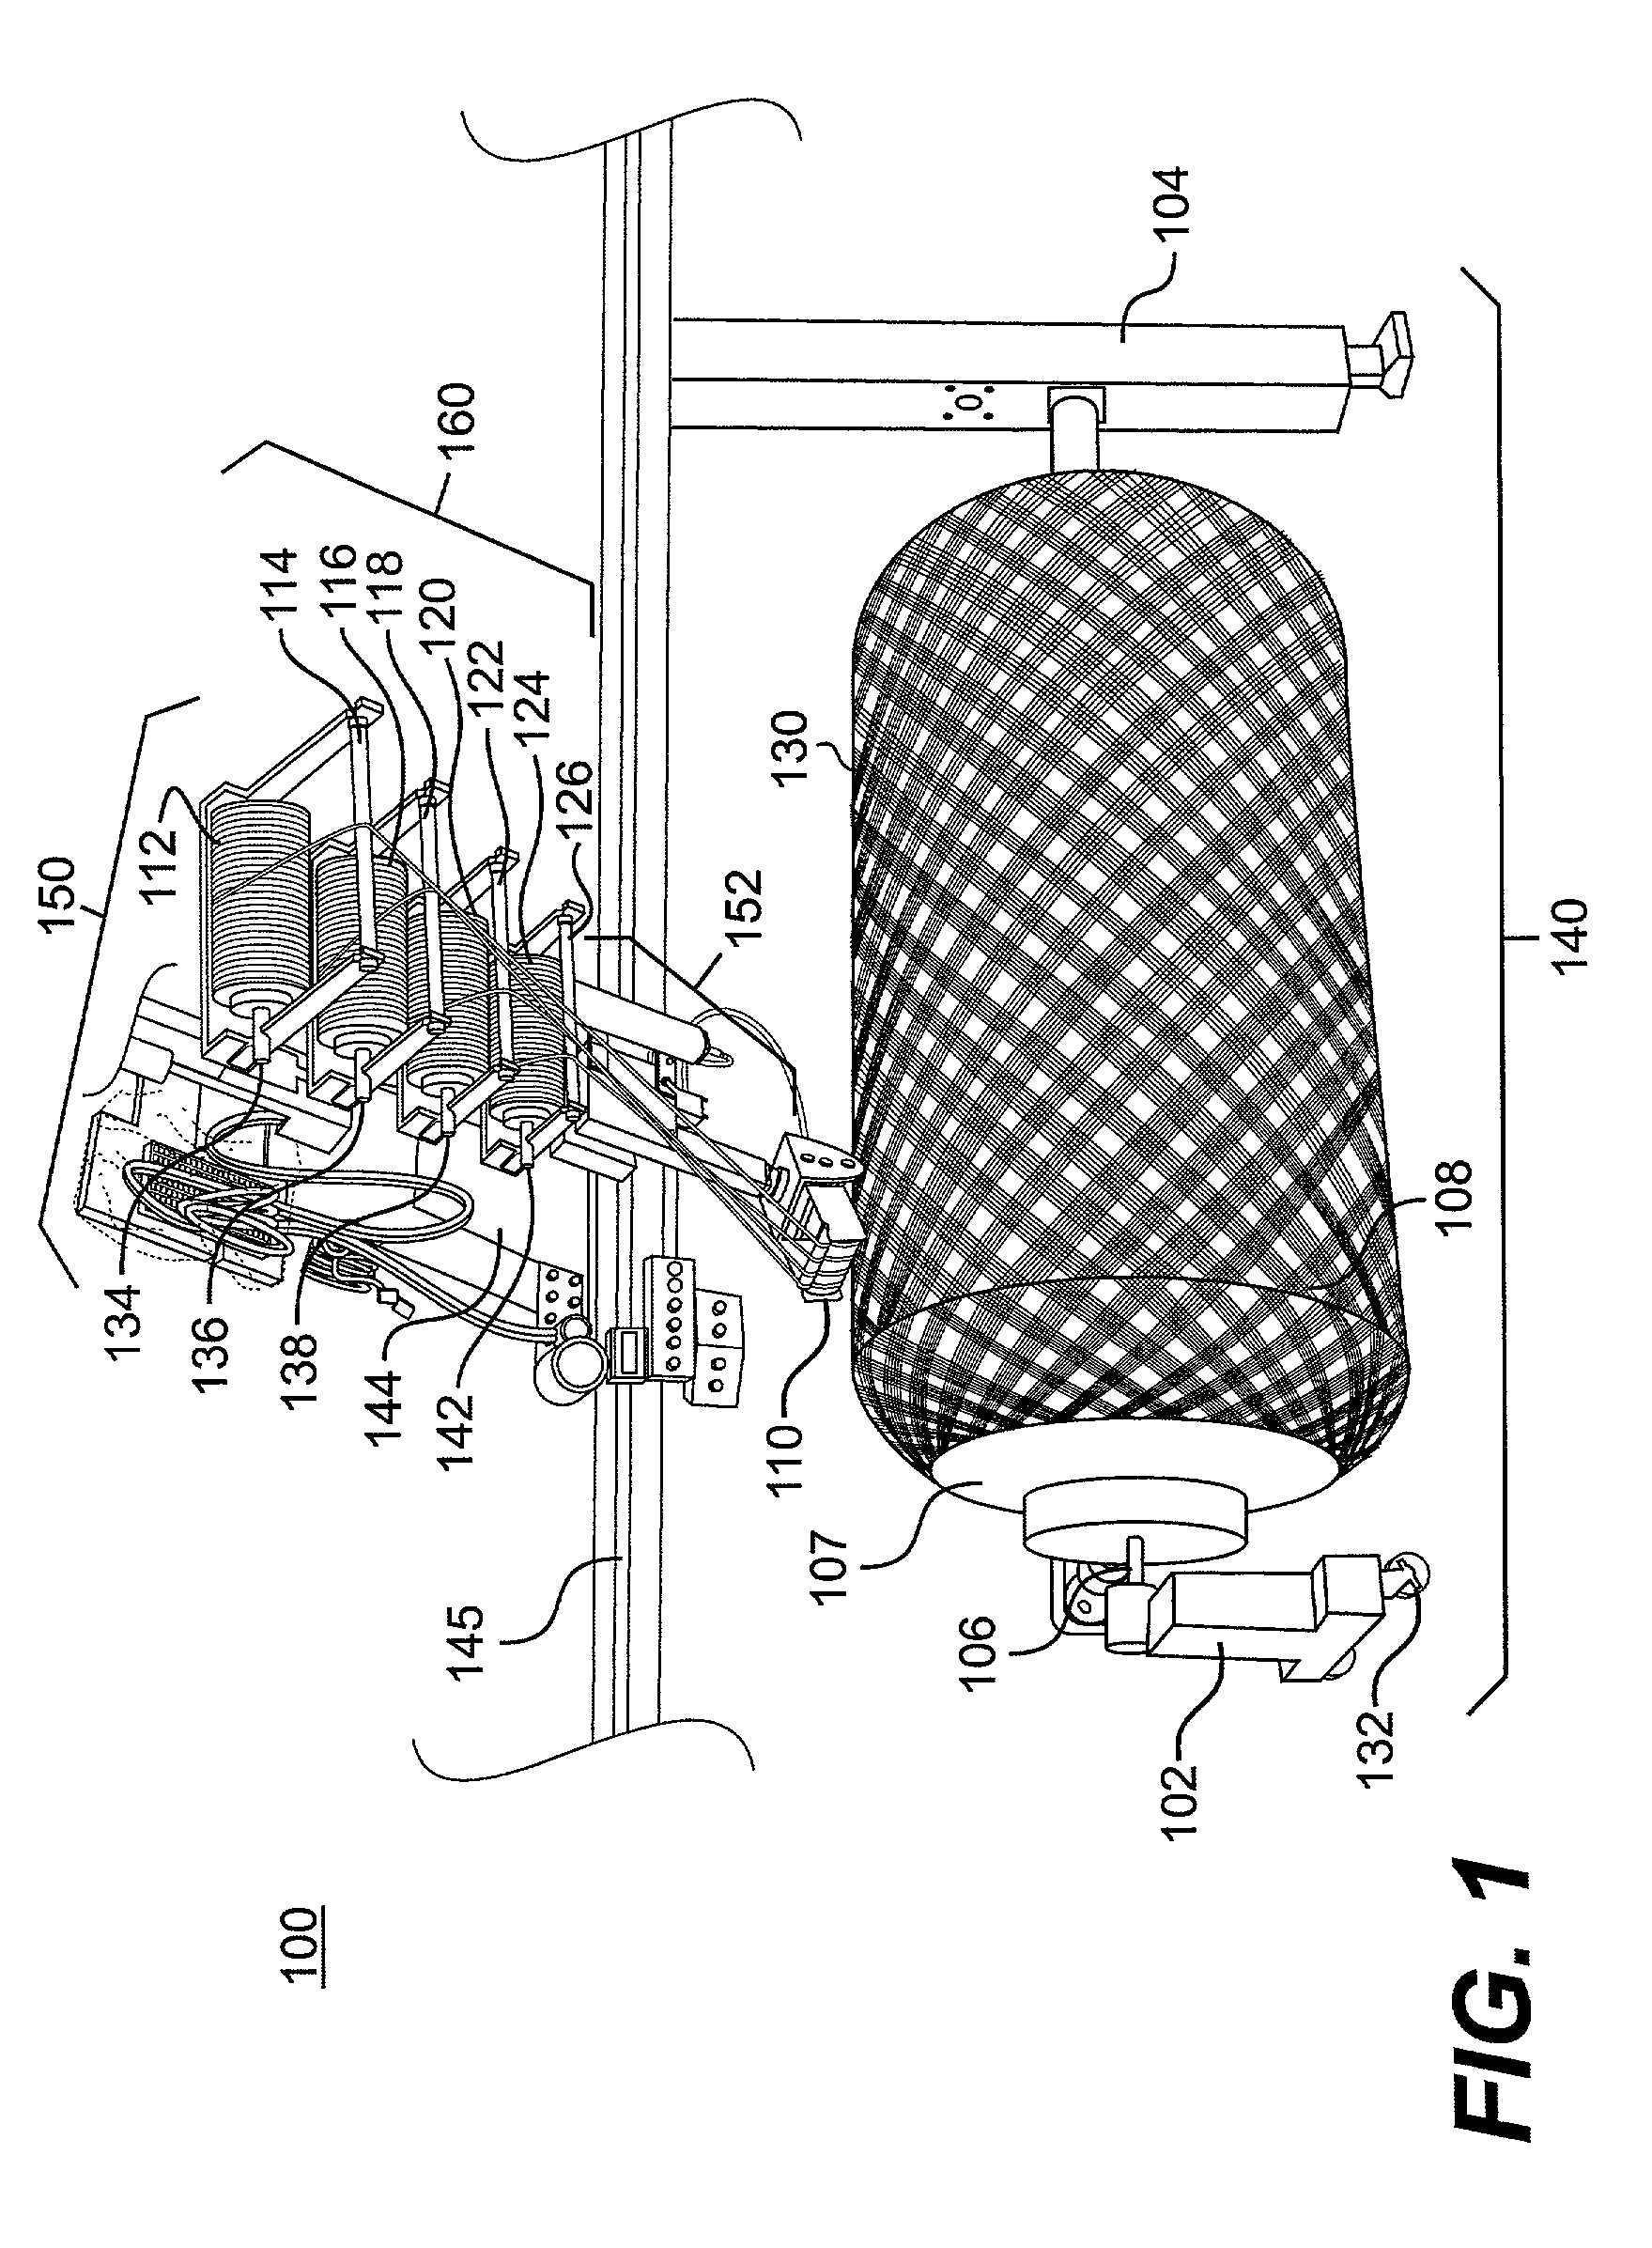 Filament winding apparatus and methods of winding filament